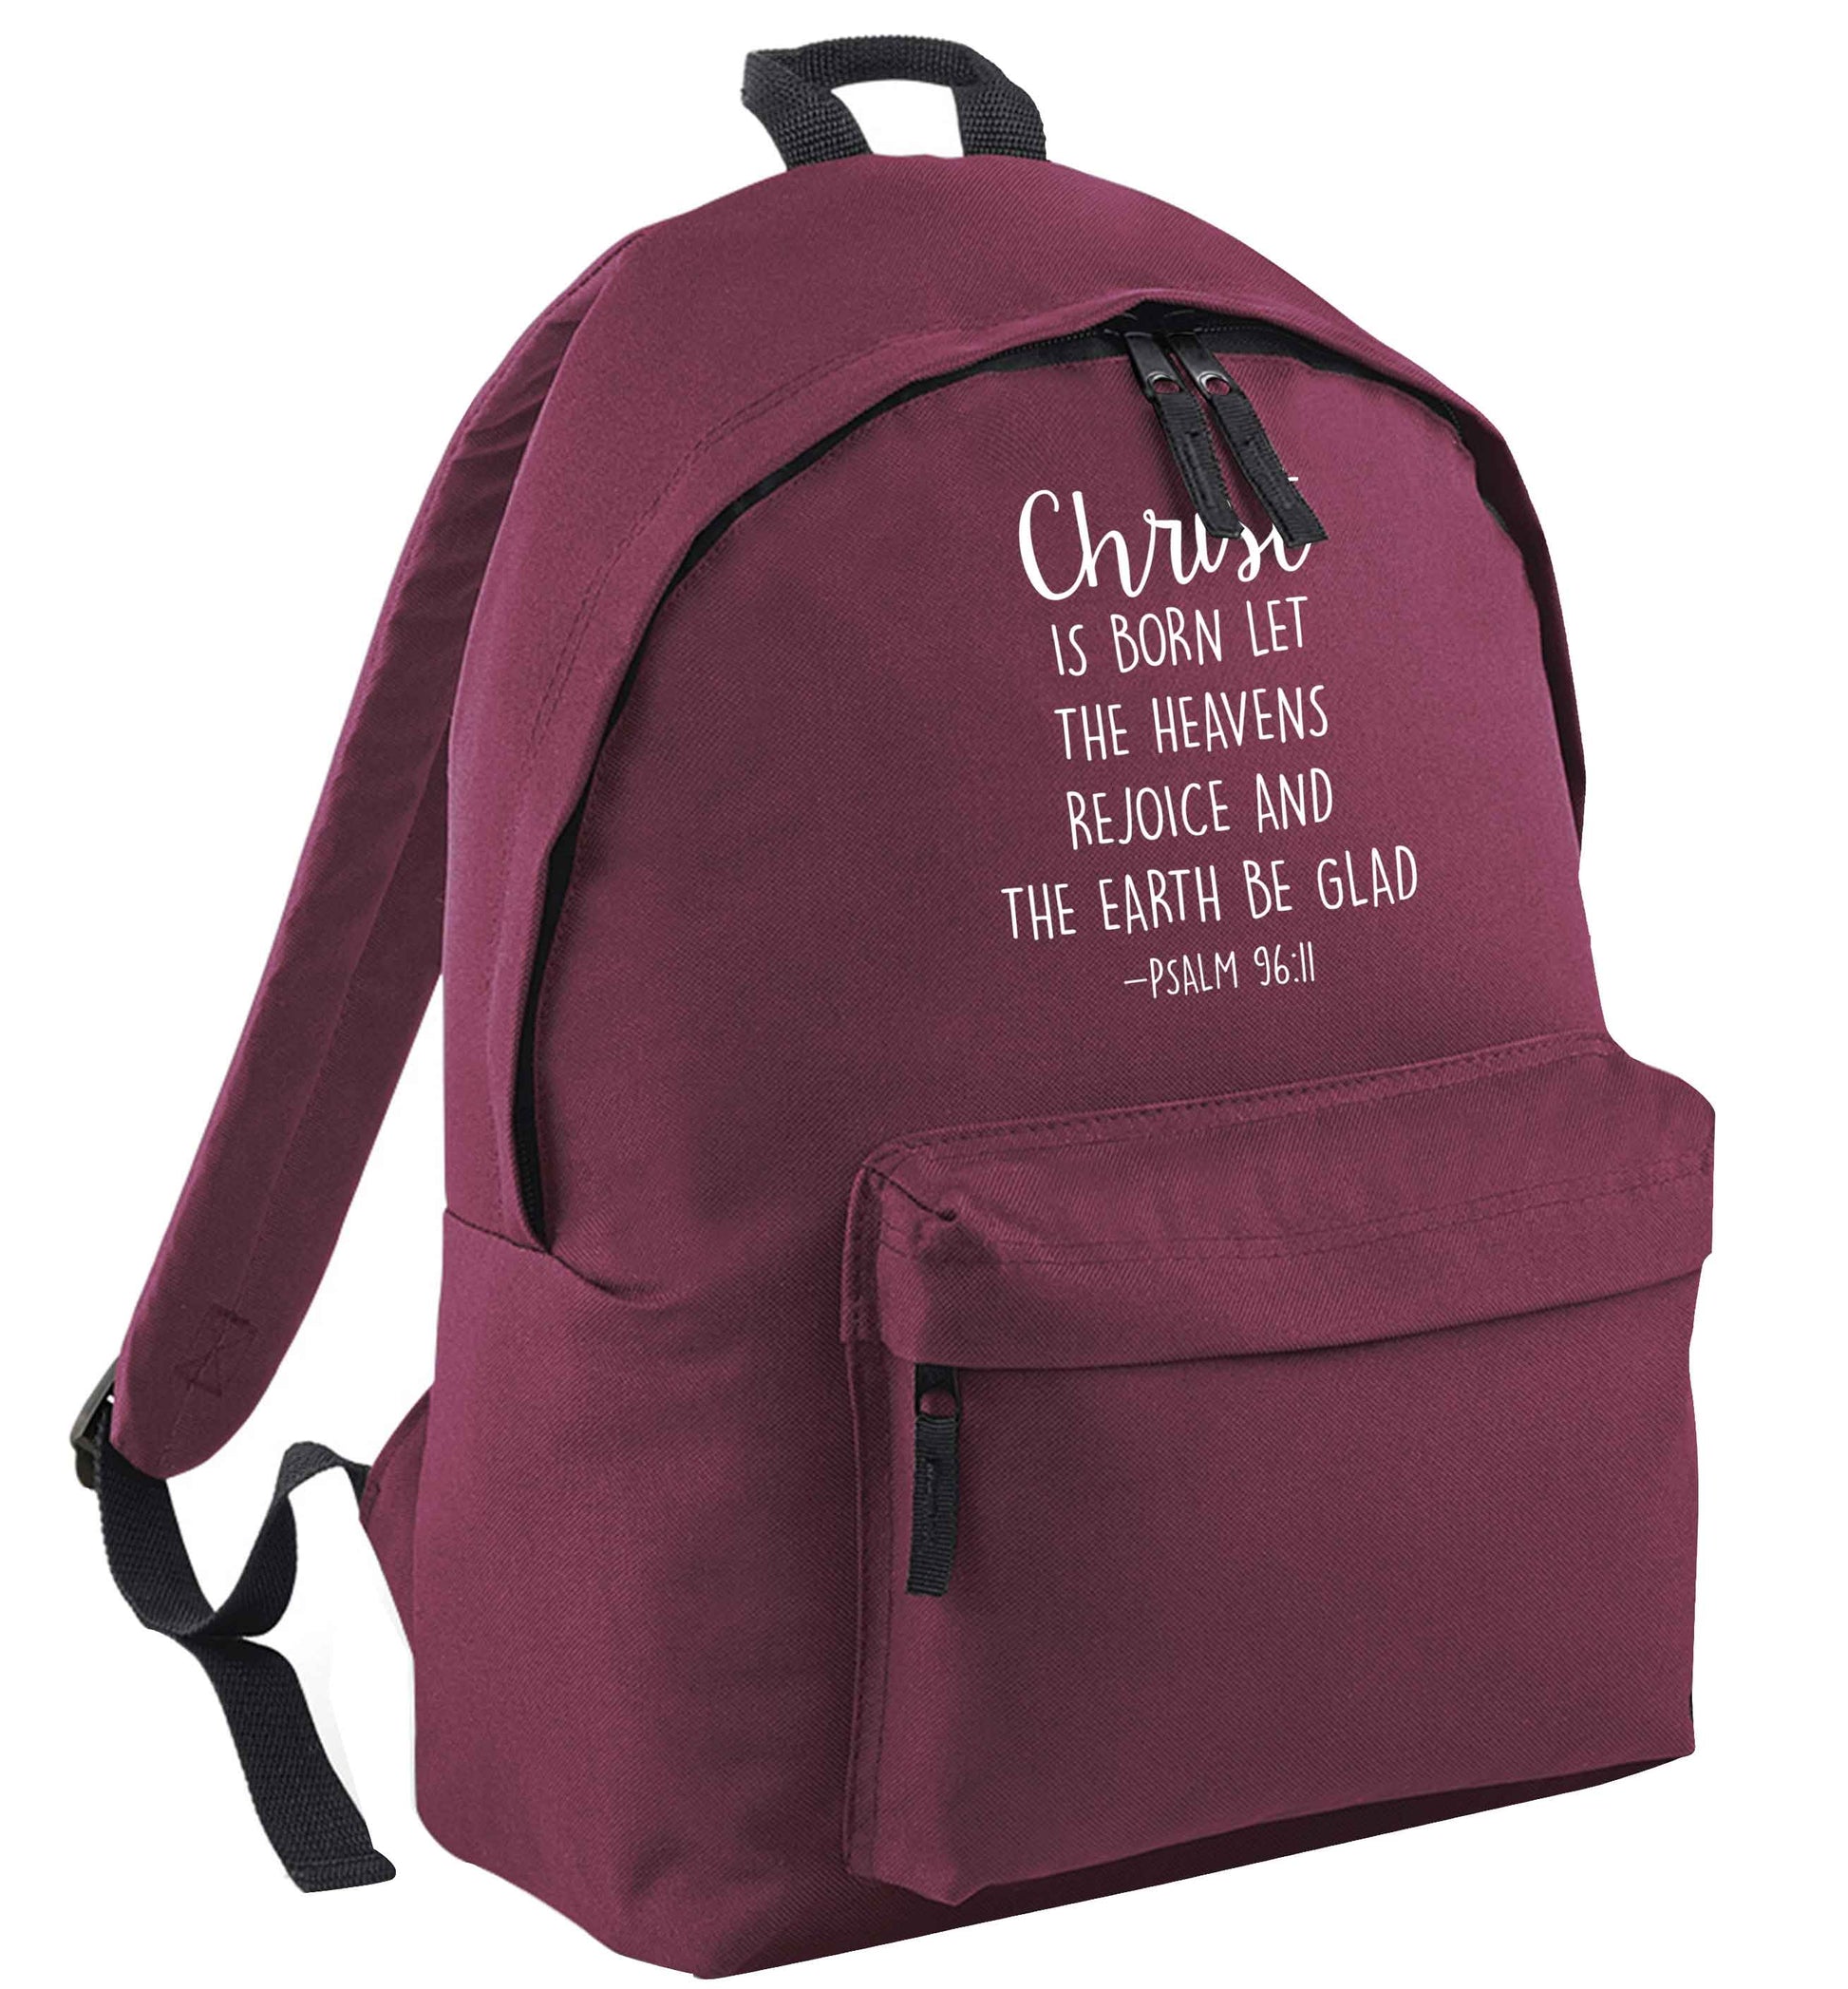 Christ is Born Psalm 96:11 maroon adults backpack